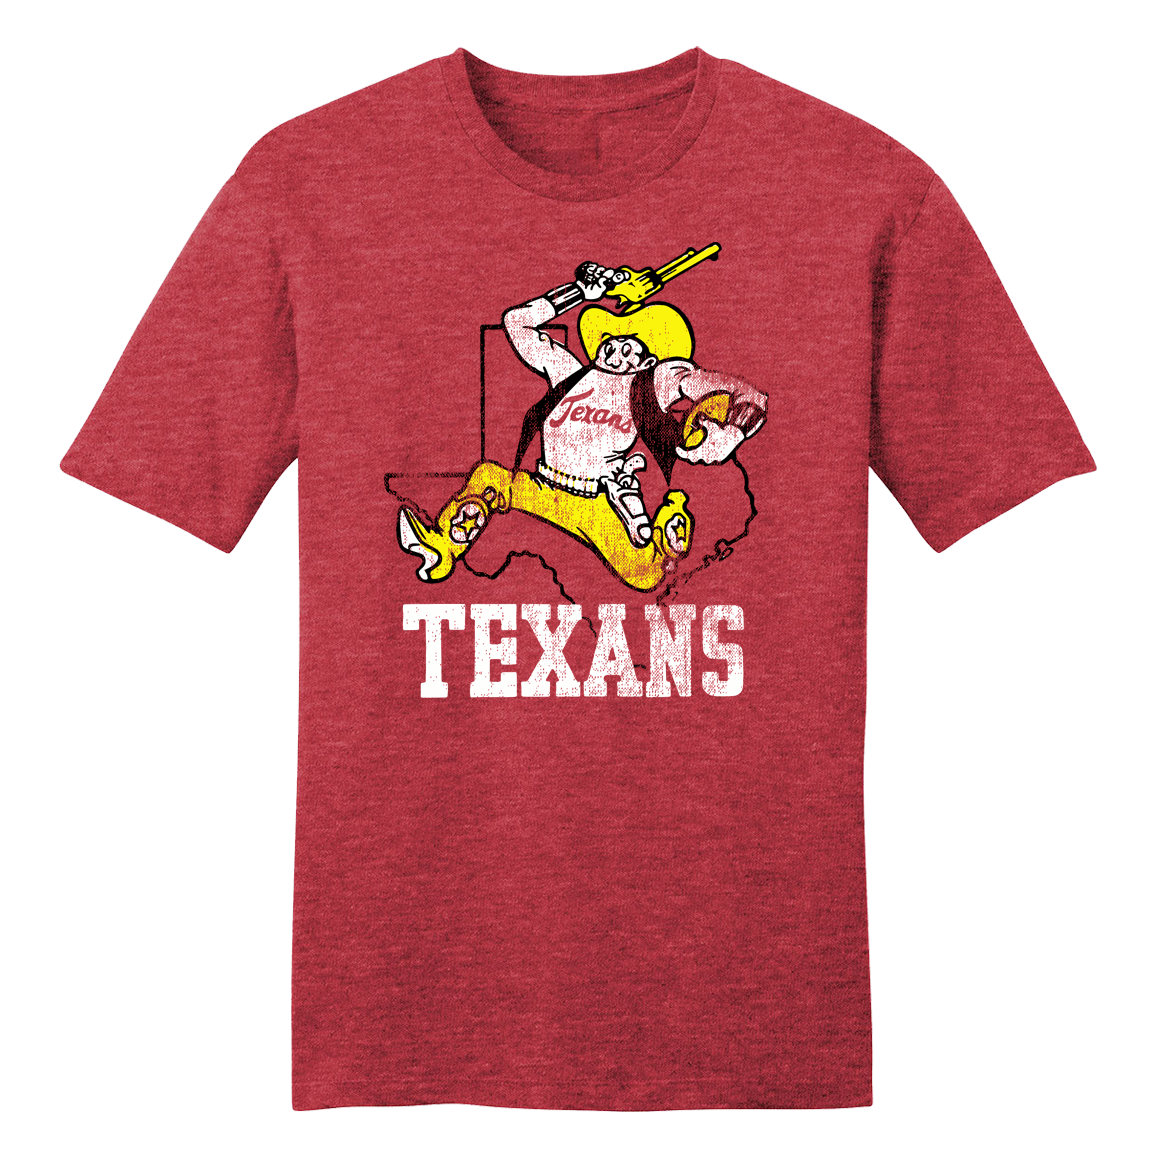 Dallas Texans 1960 - Unisex T-Shirt / Heather Red / S